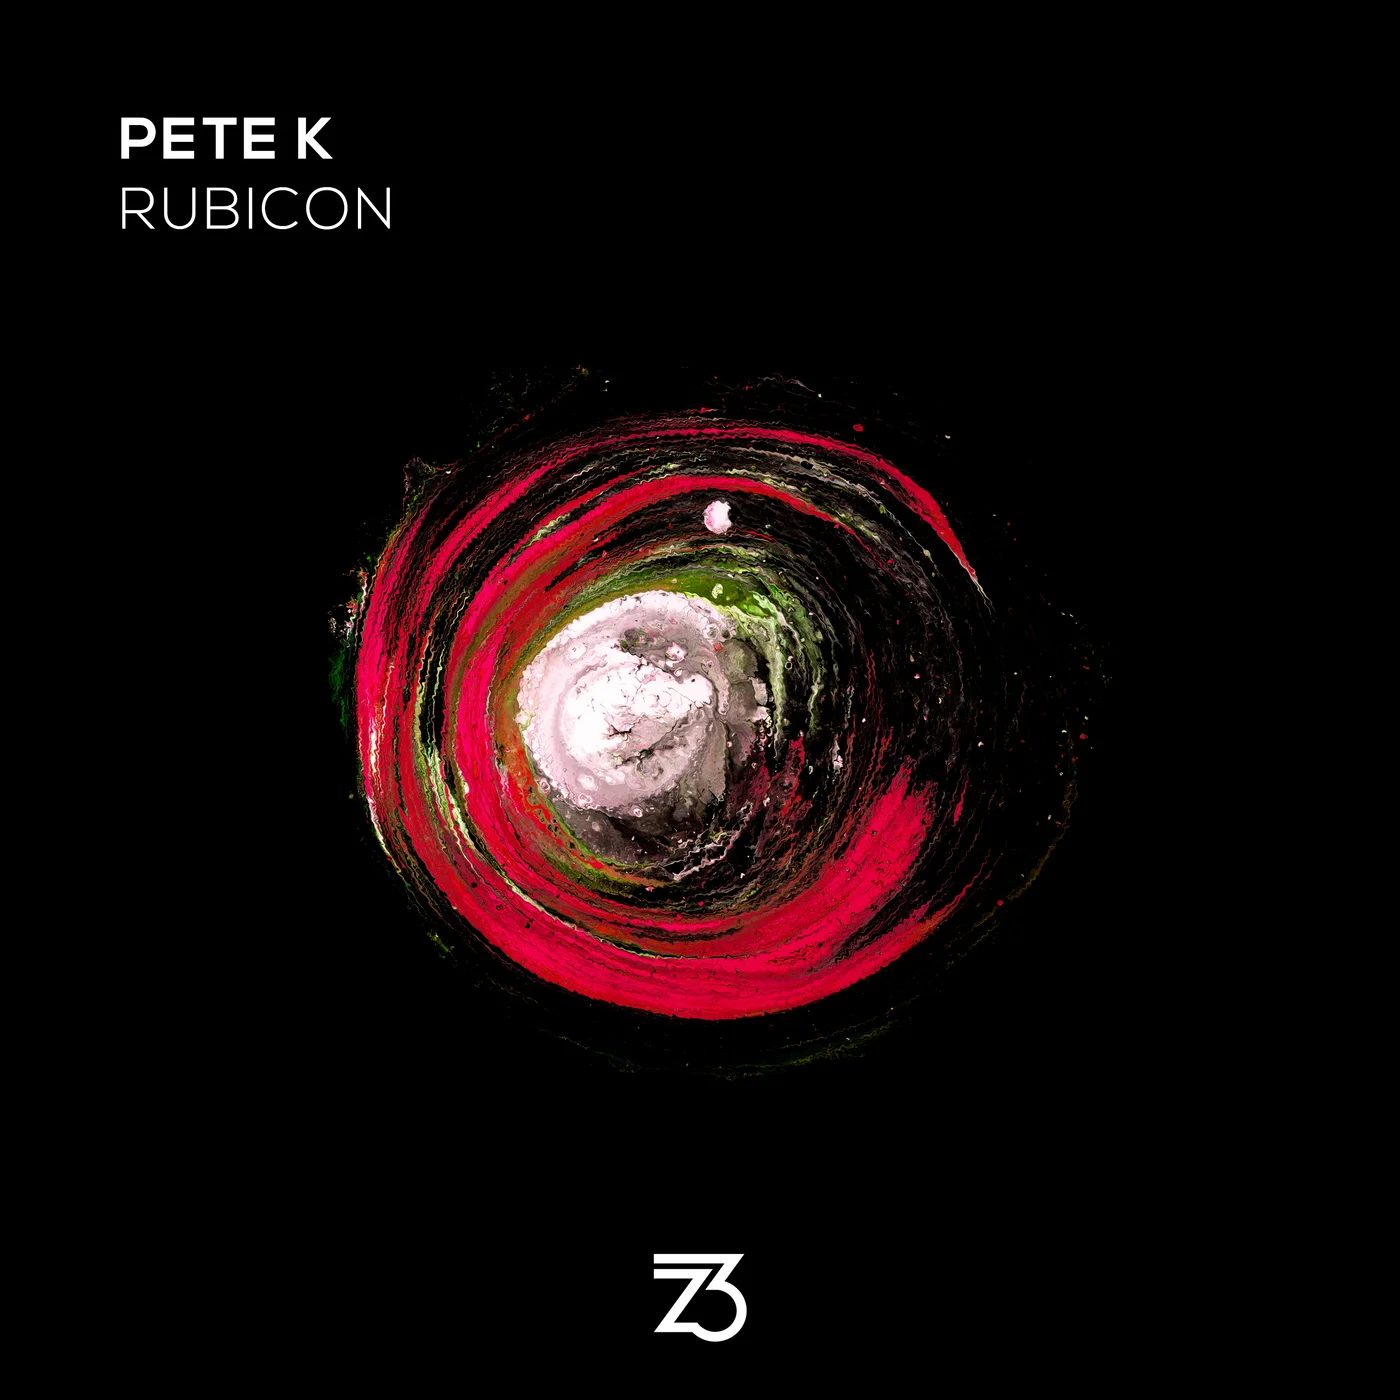 Pete K Delivers Melodic & Progressive Vibes With “Rubicon”